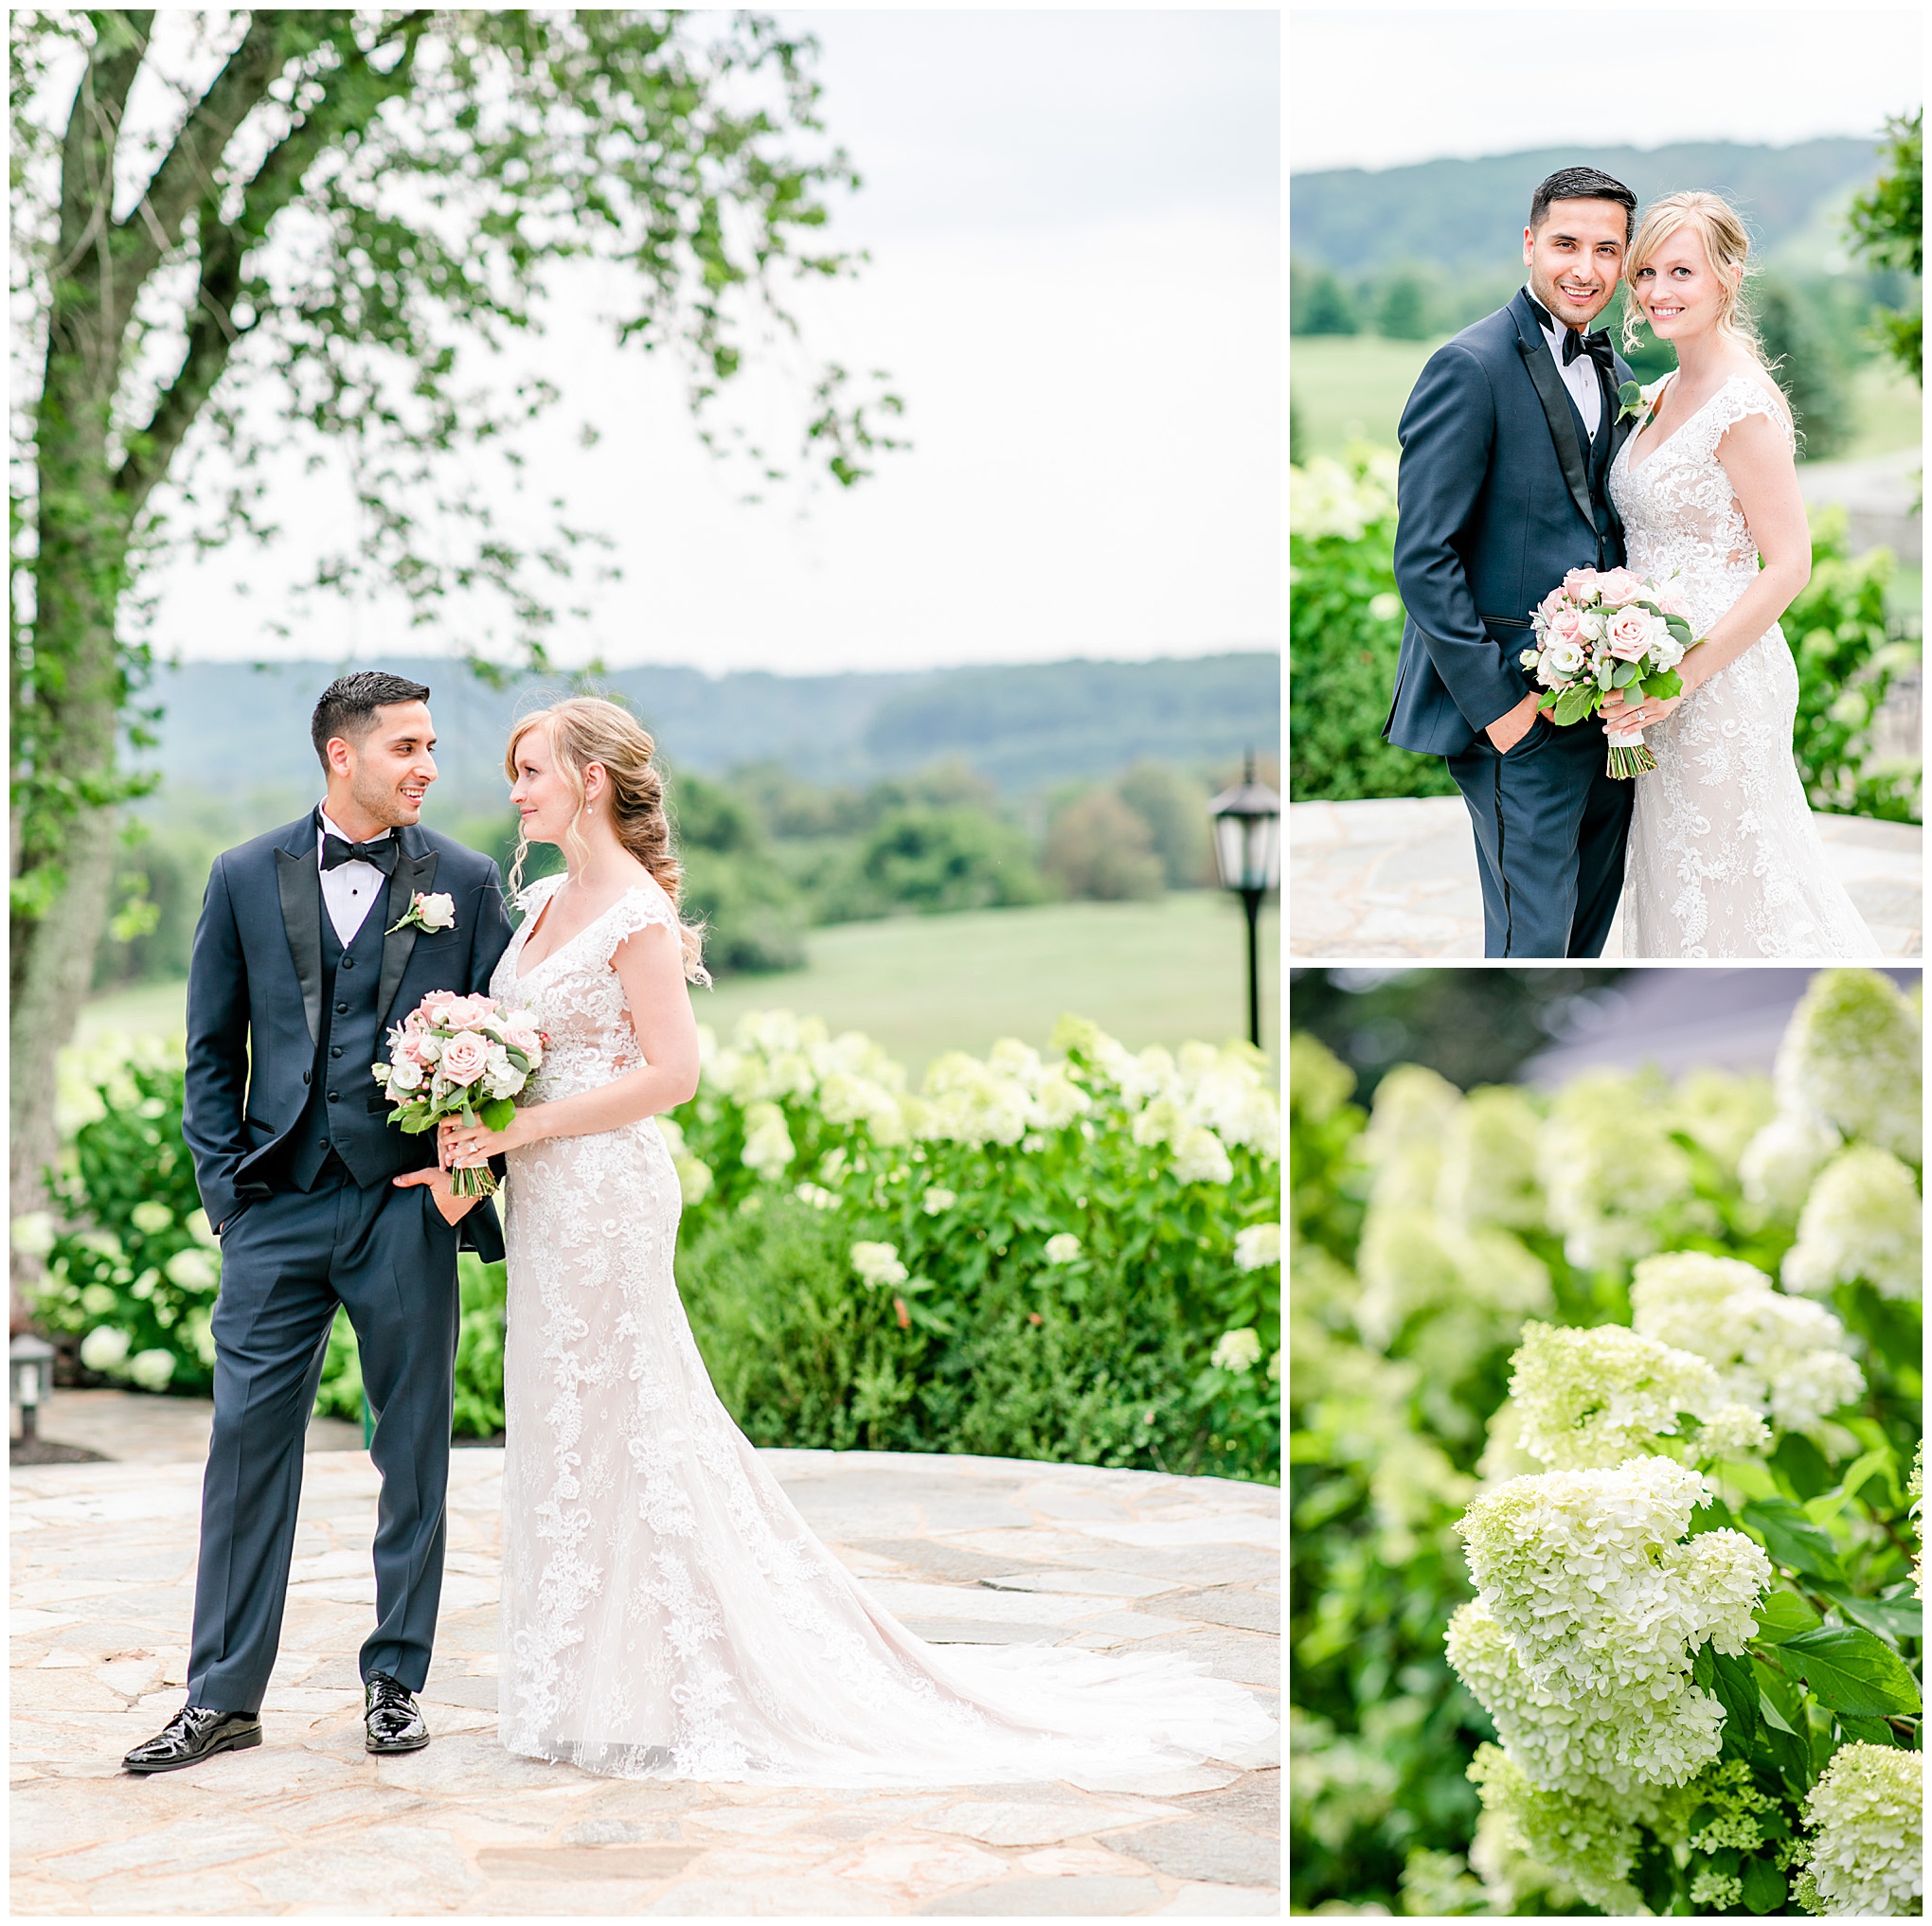 mid-summer Hayfields Country Club, Hunt Valley wedding, Baltimore wedding photographer, Rachel E.H. Photography, DC wedding photographer, summer wedding, pink and navy aesthetic, Washington DC wedding photography, Baltimore wedding photography, hydrangea, newlywed portraits